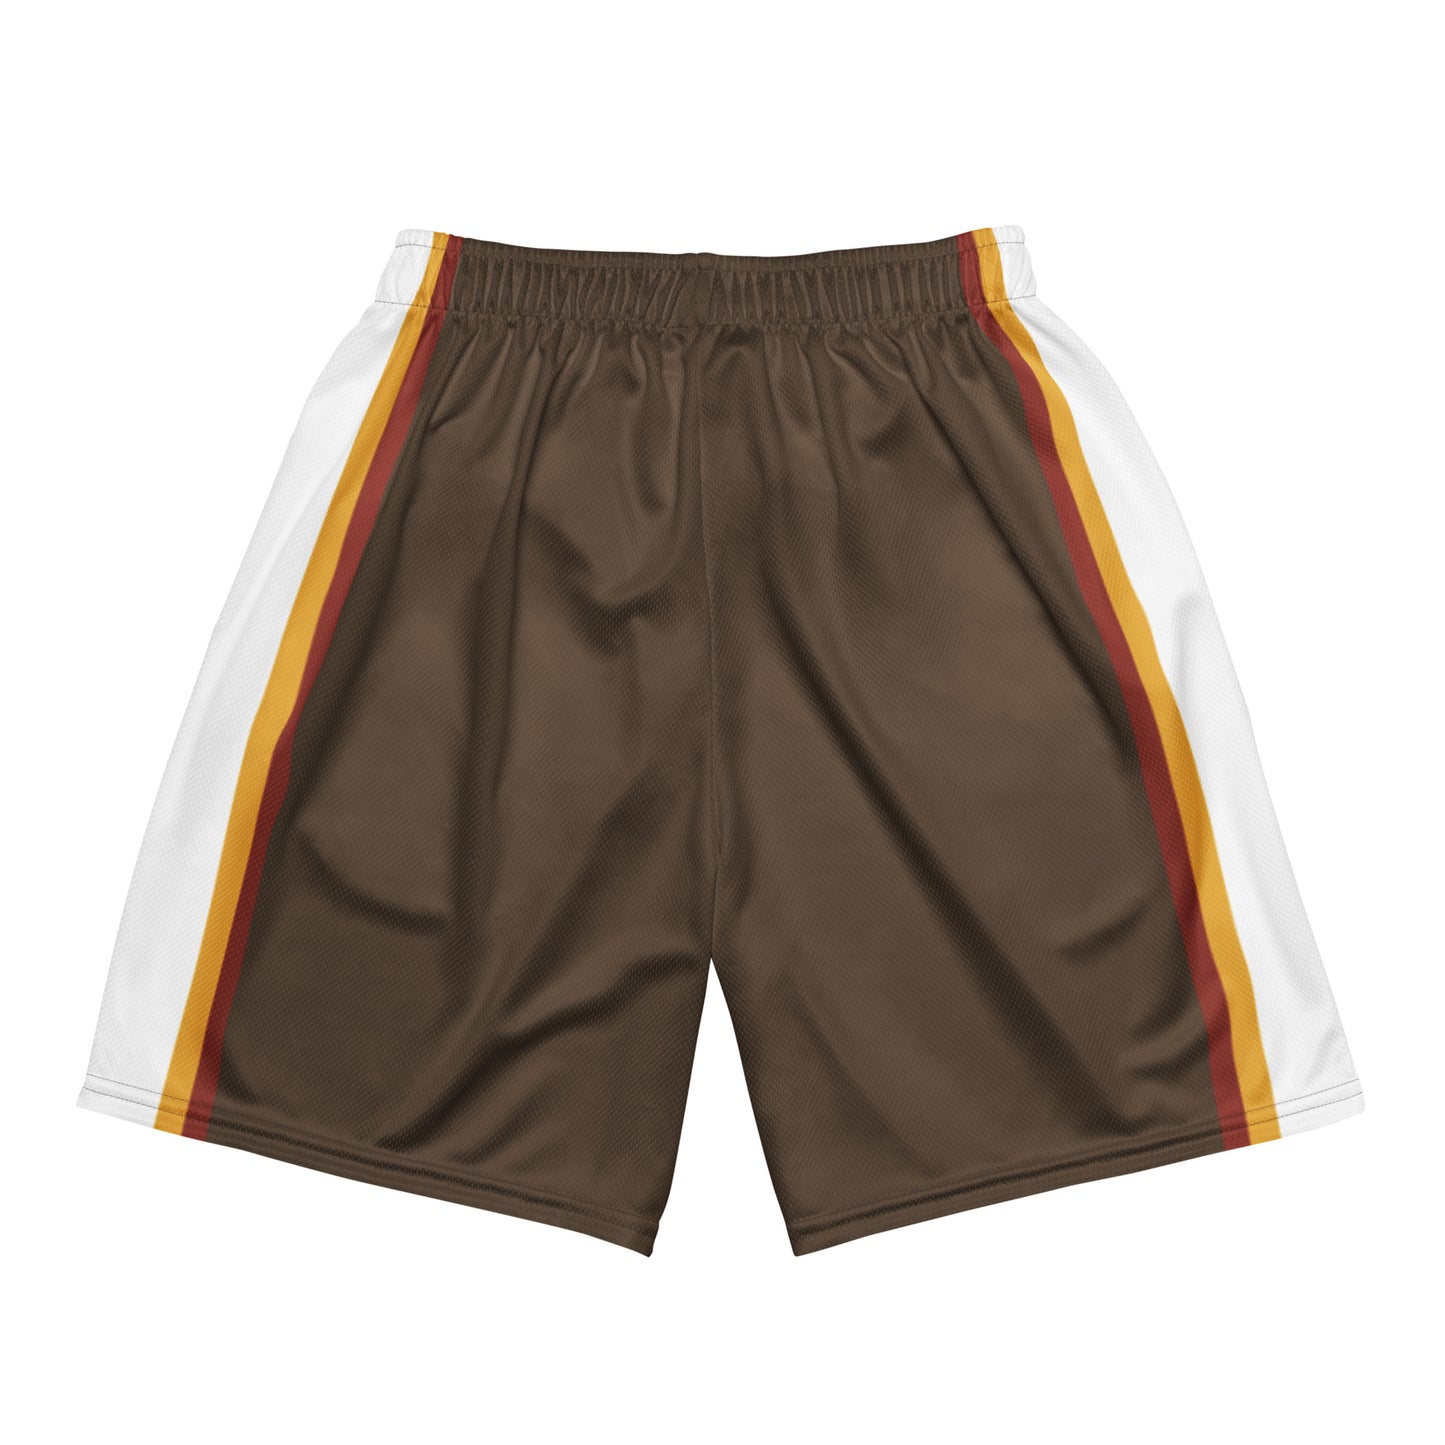 Wildfire Cigars mesh shorts in brown red gold and white